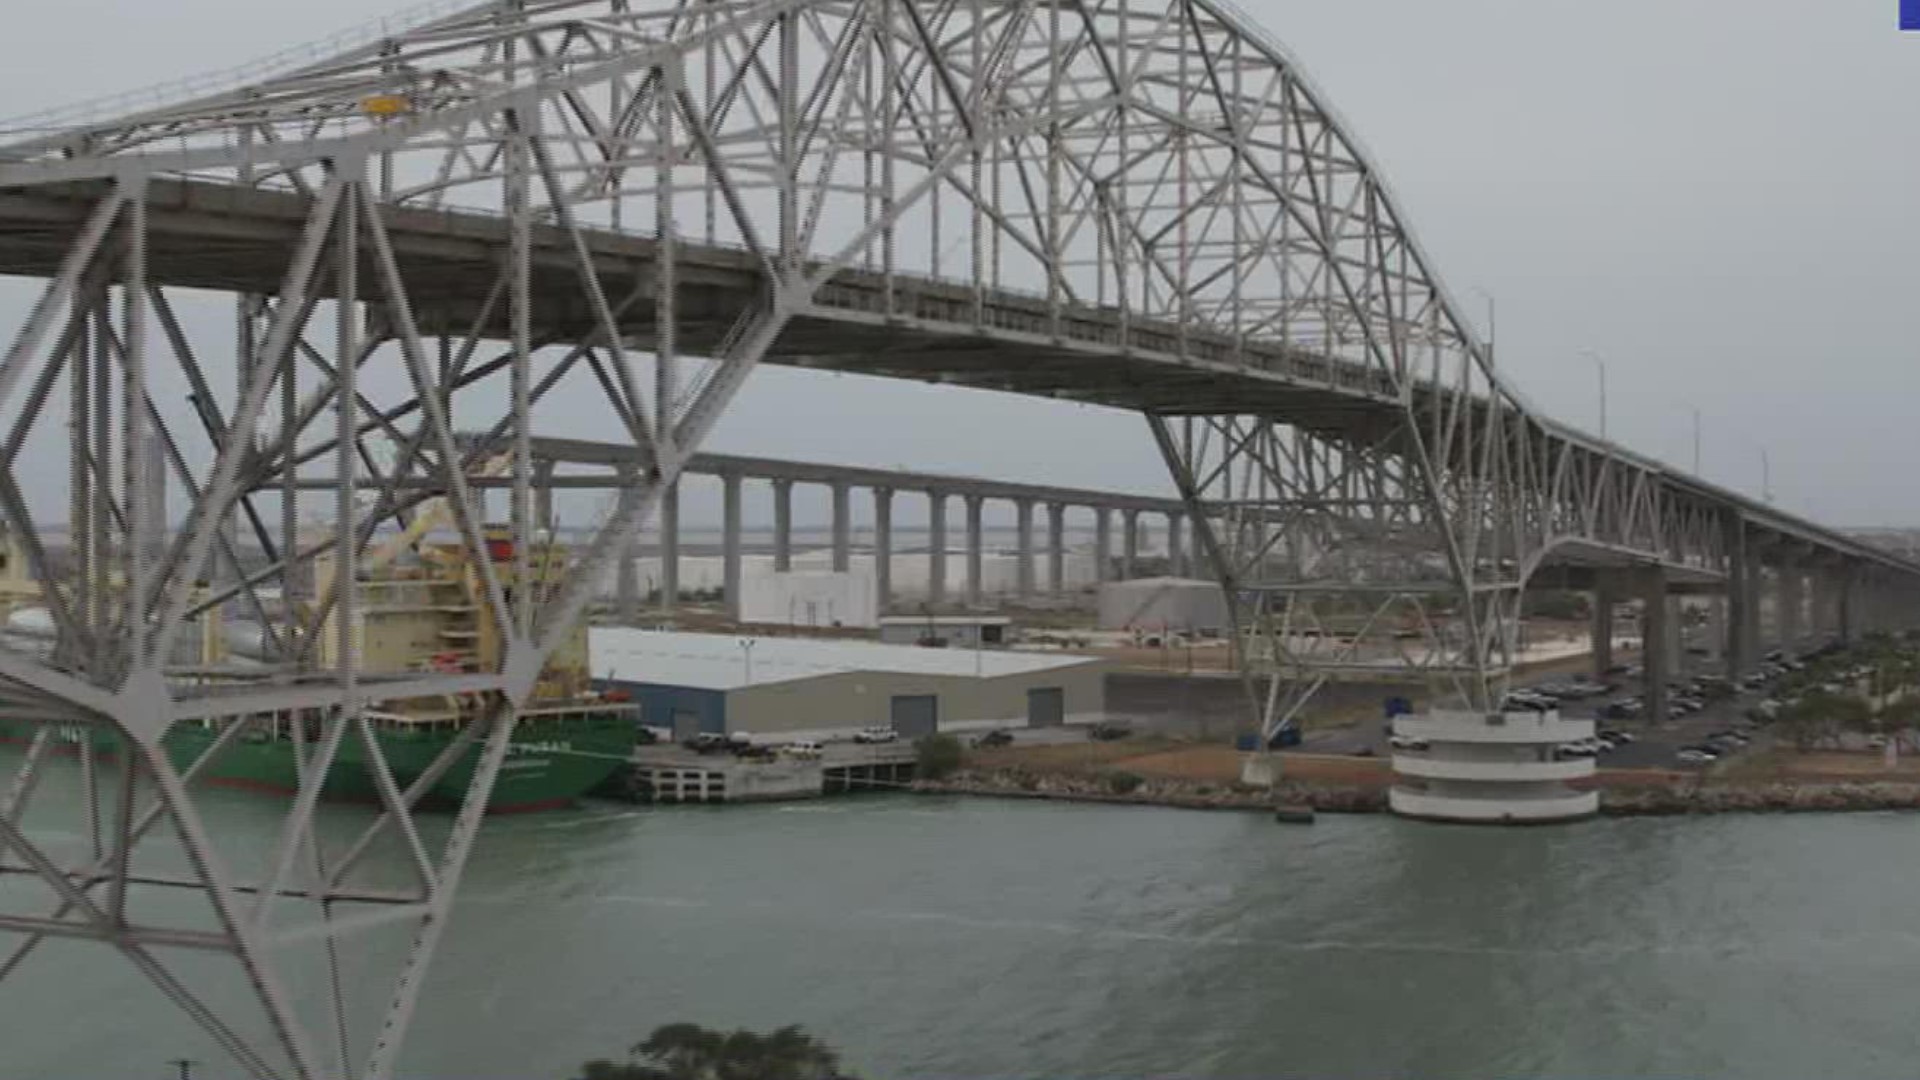 With more concerns surrounding the Harbor Bridge, the already delayed project will not only impact Corpus Christi residents but surrounding counties.